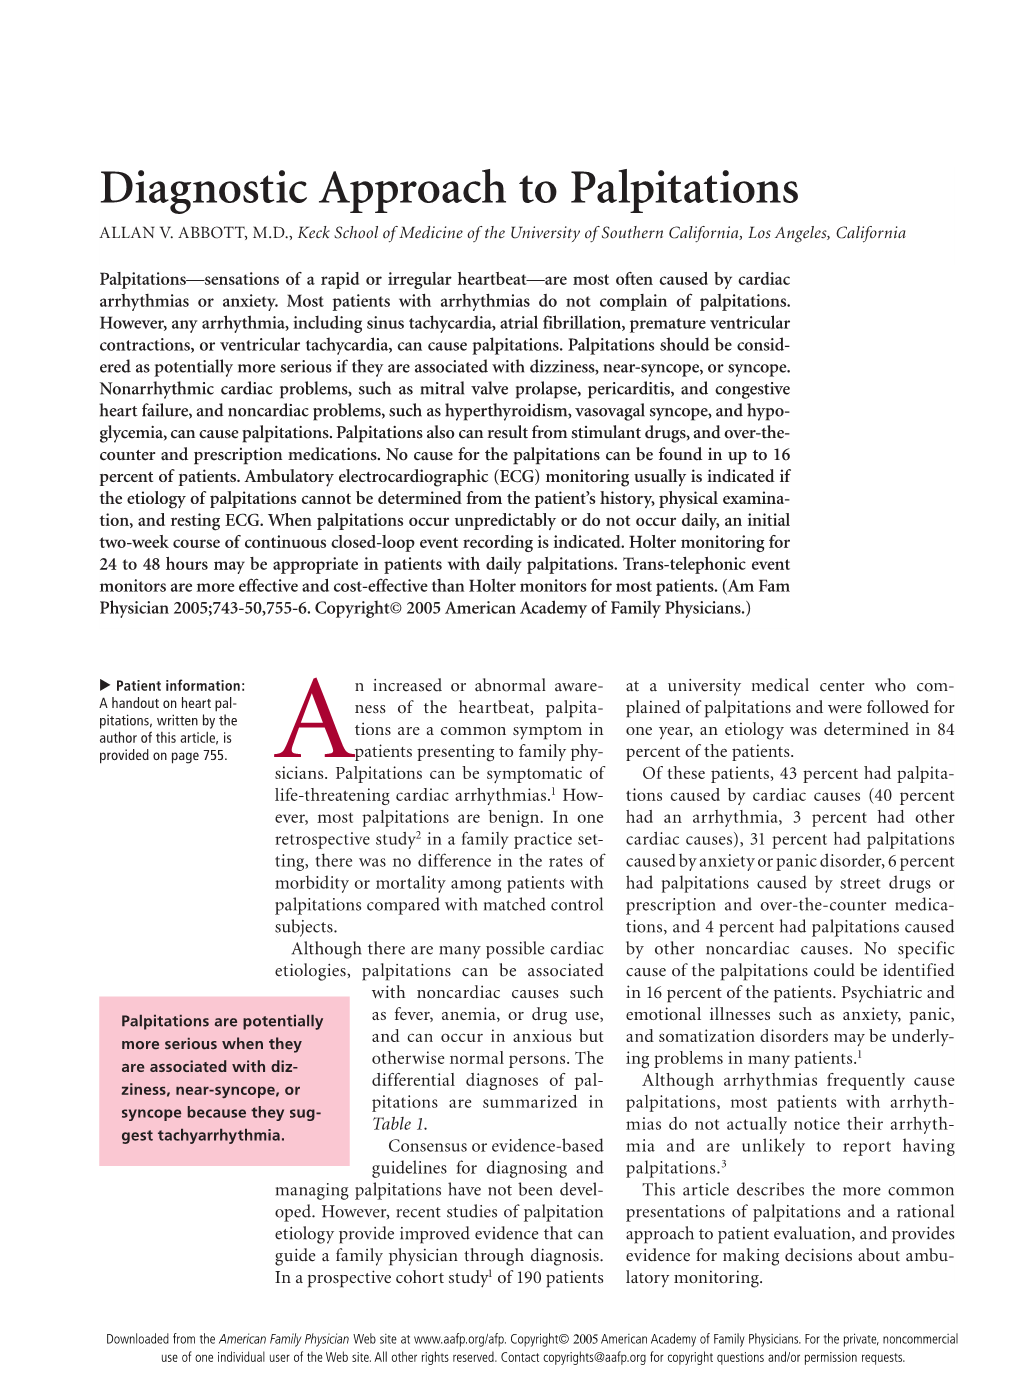 Diagnostic Approach to Palpitations Diagnostic Approach Pitations, Written by the Author of This Article, Is Provided on Page 755